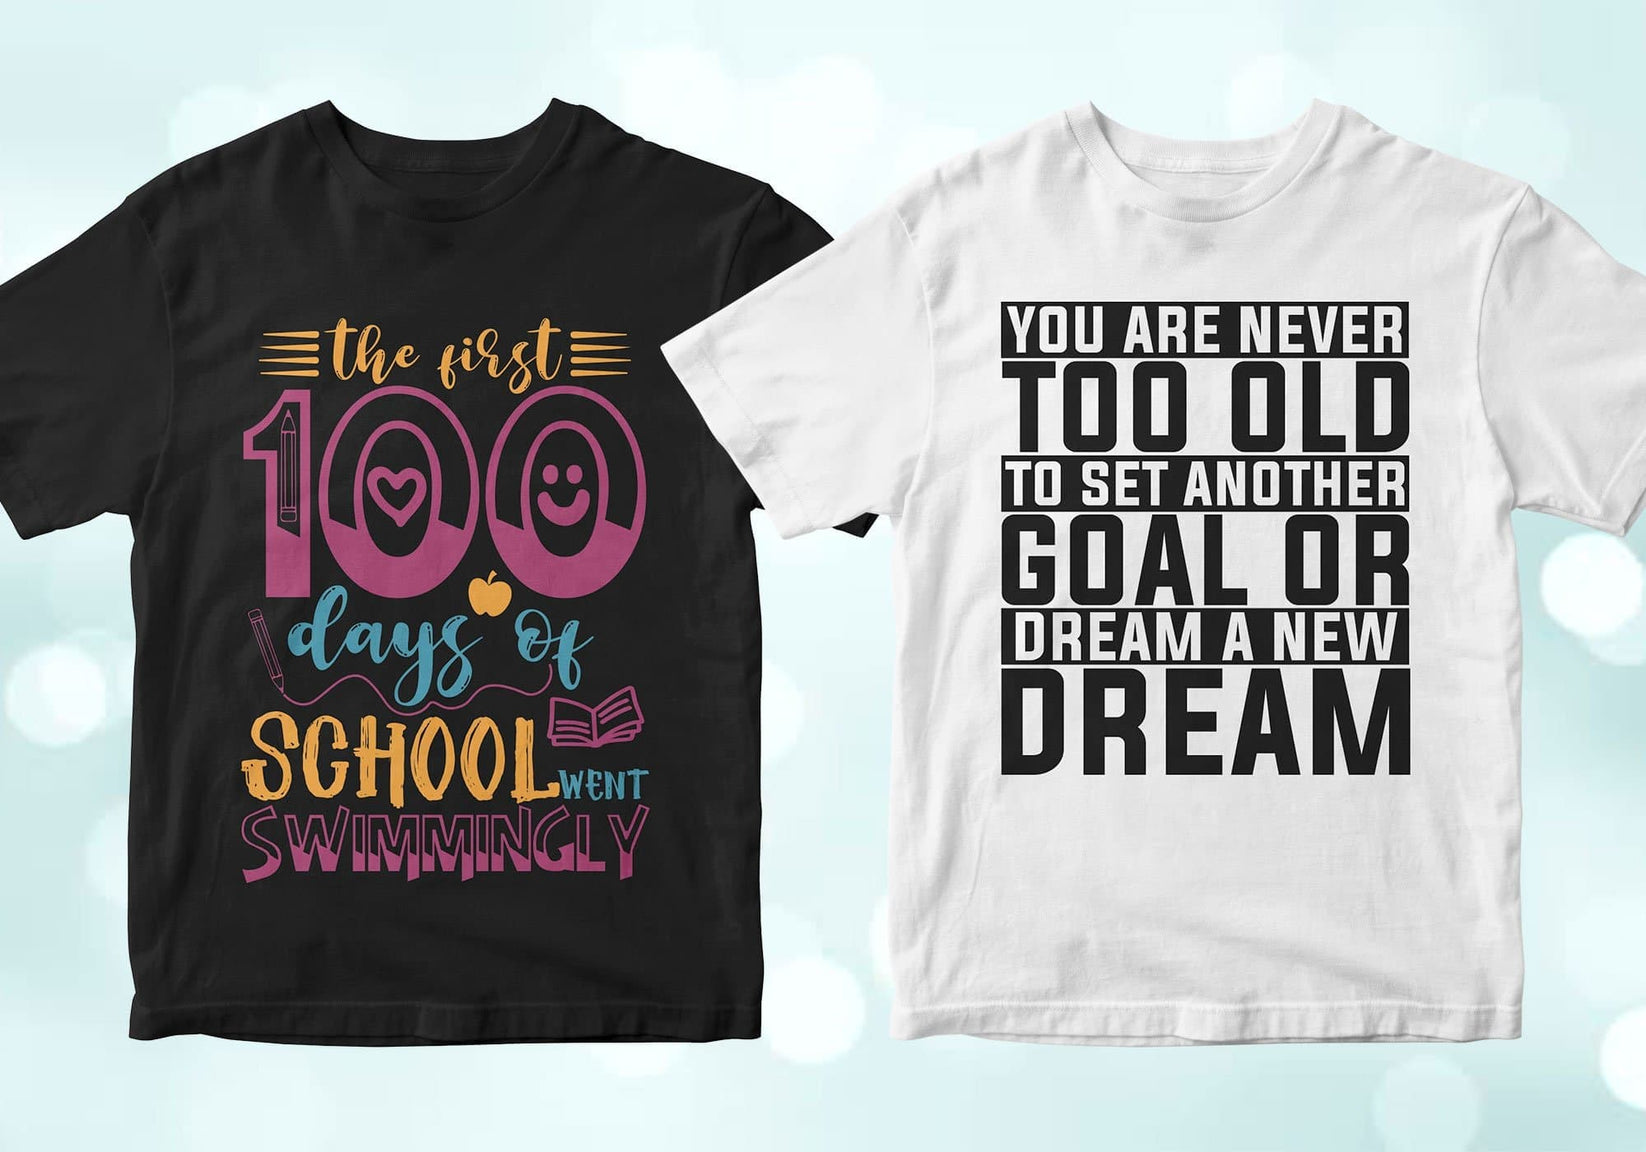 The first 100 days of school went swimmingly, You are never too old to set another goal or dream a new dream